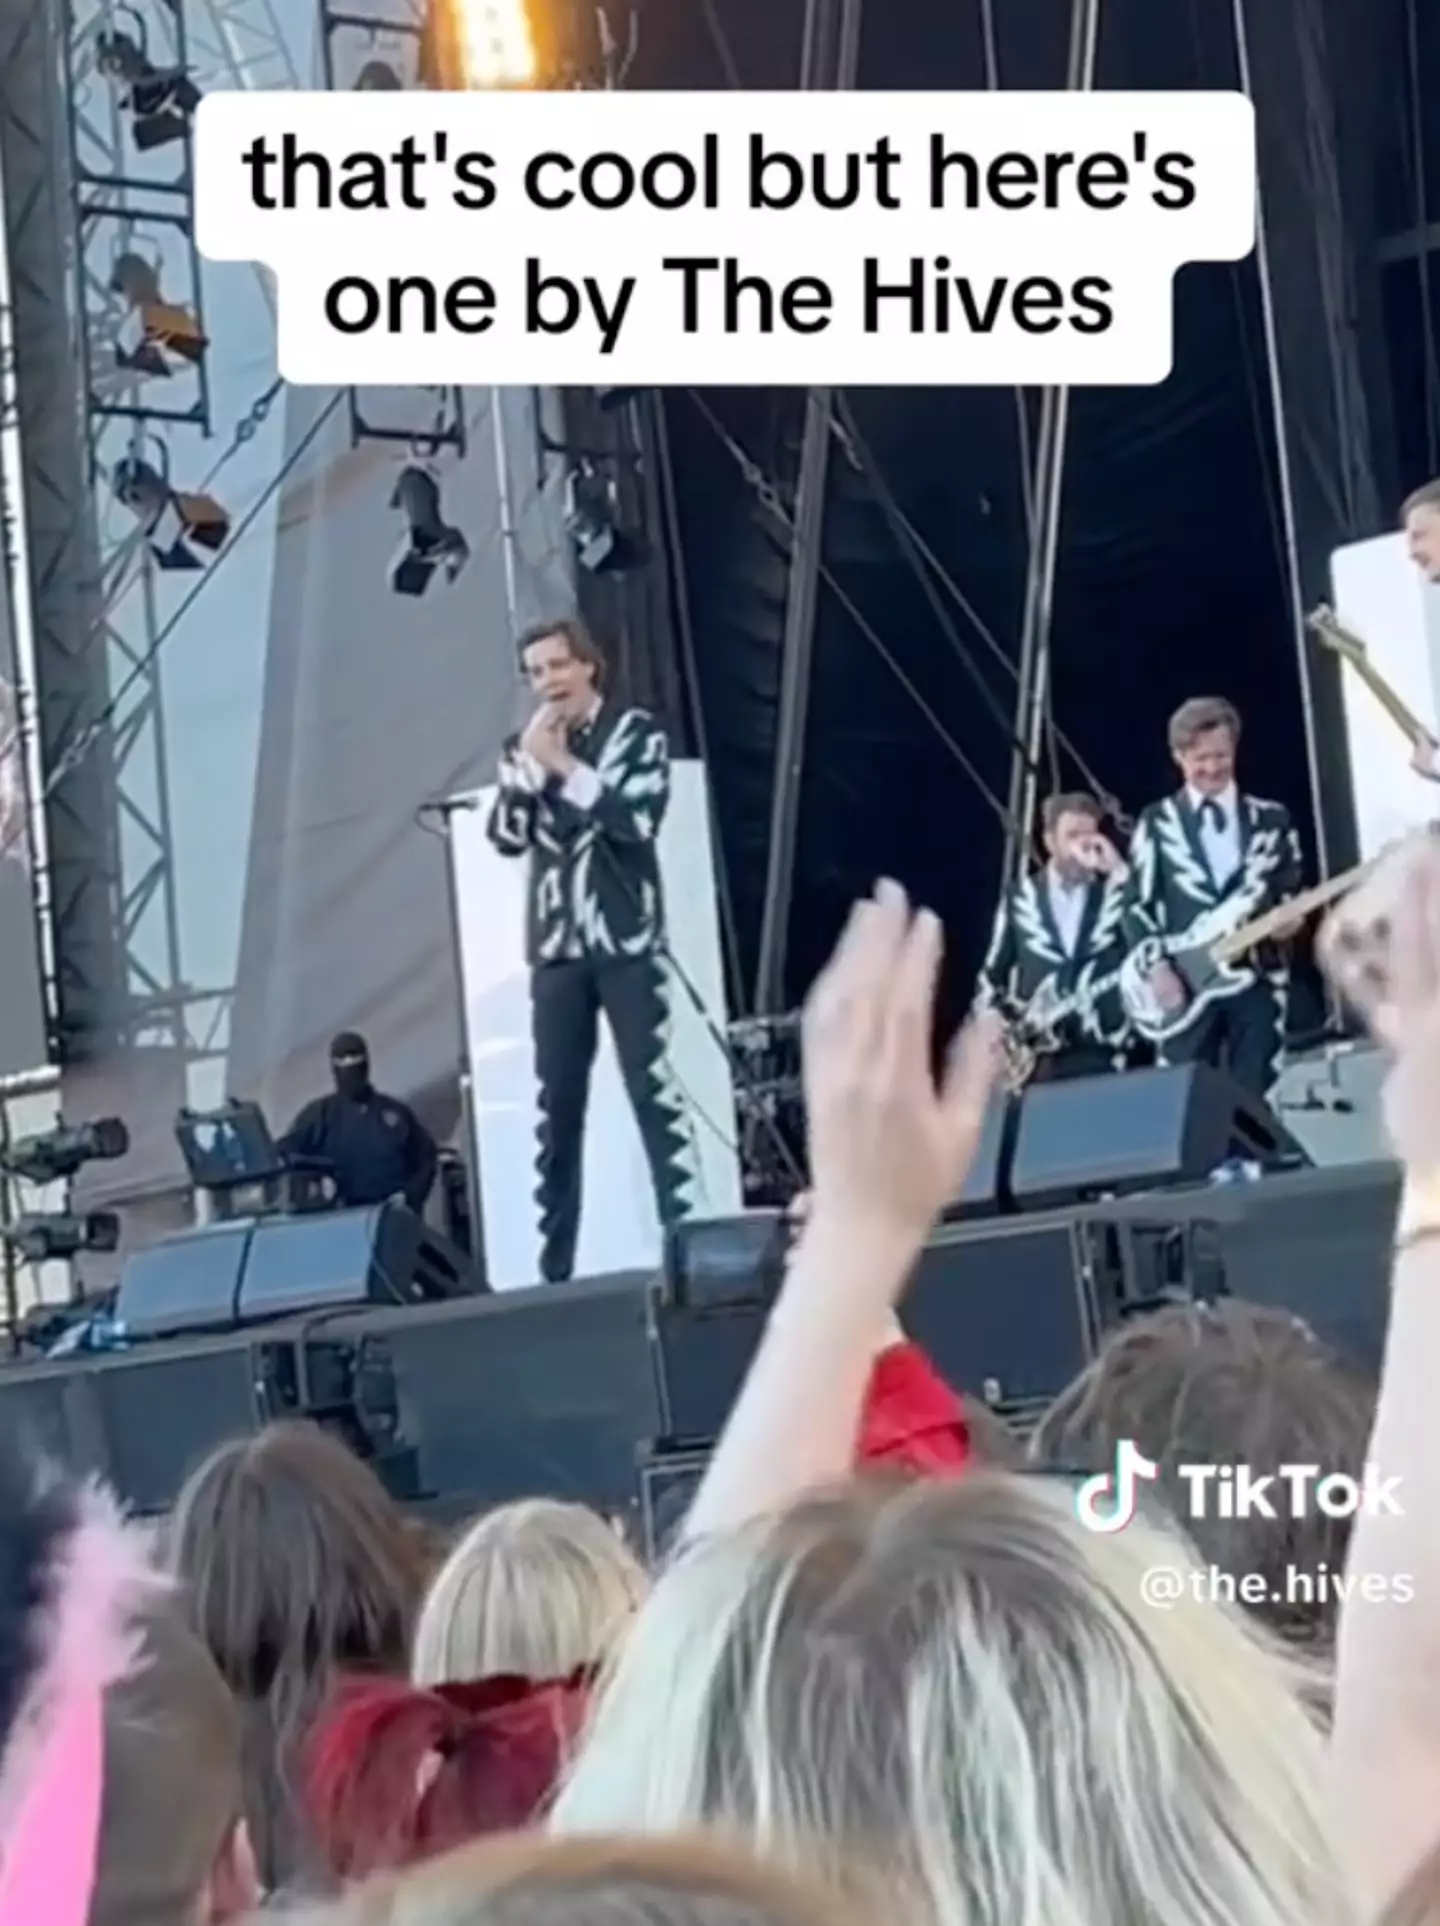 Crowds still cheered for The Hives even without getting an Oasis song.